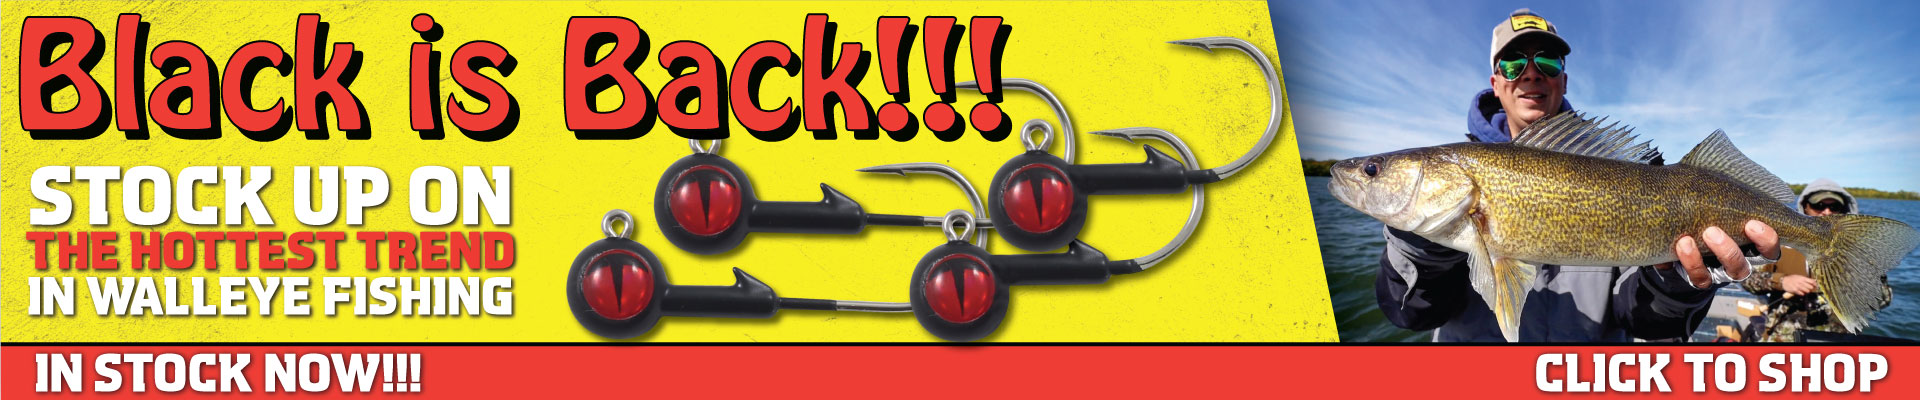 Stony Tackle Shack  Bait, Lures, Jigs, Reels, Rods, Parkland County.